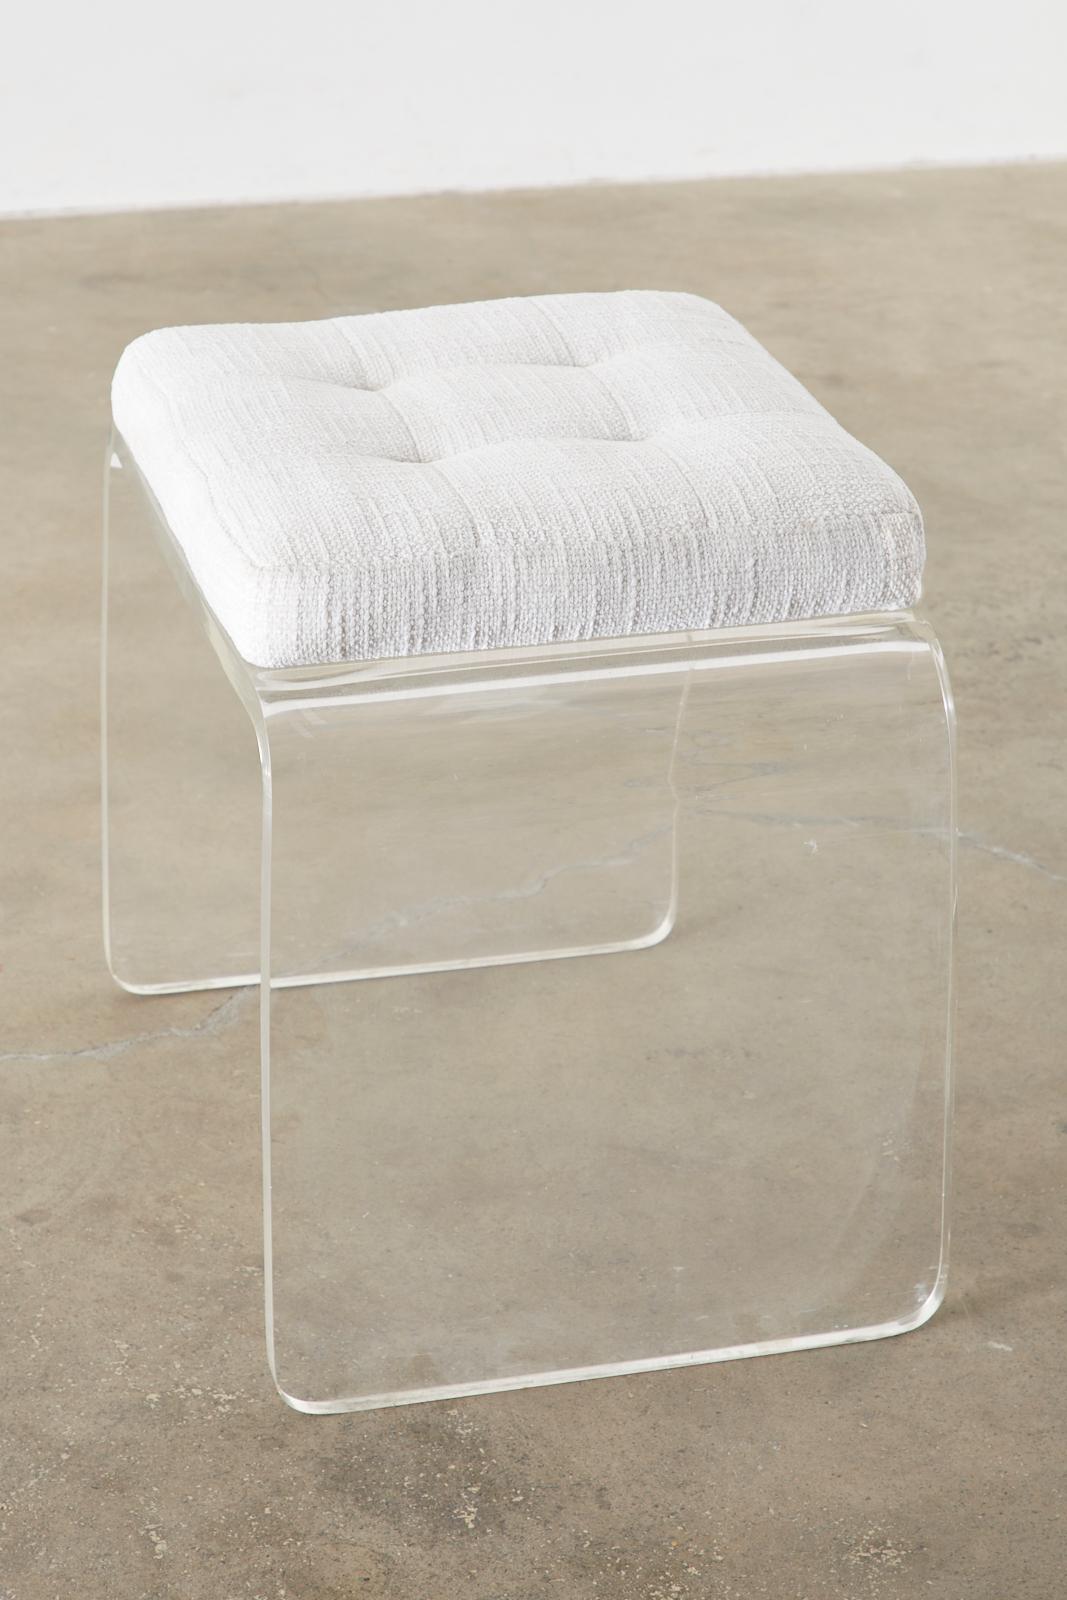 Fabric Hollywood Regency Style Lucite Waterfall Vanity Bench Stool